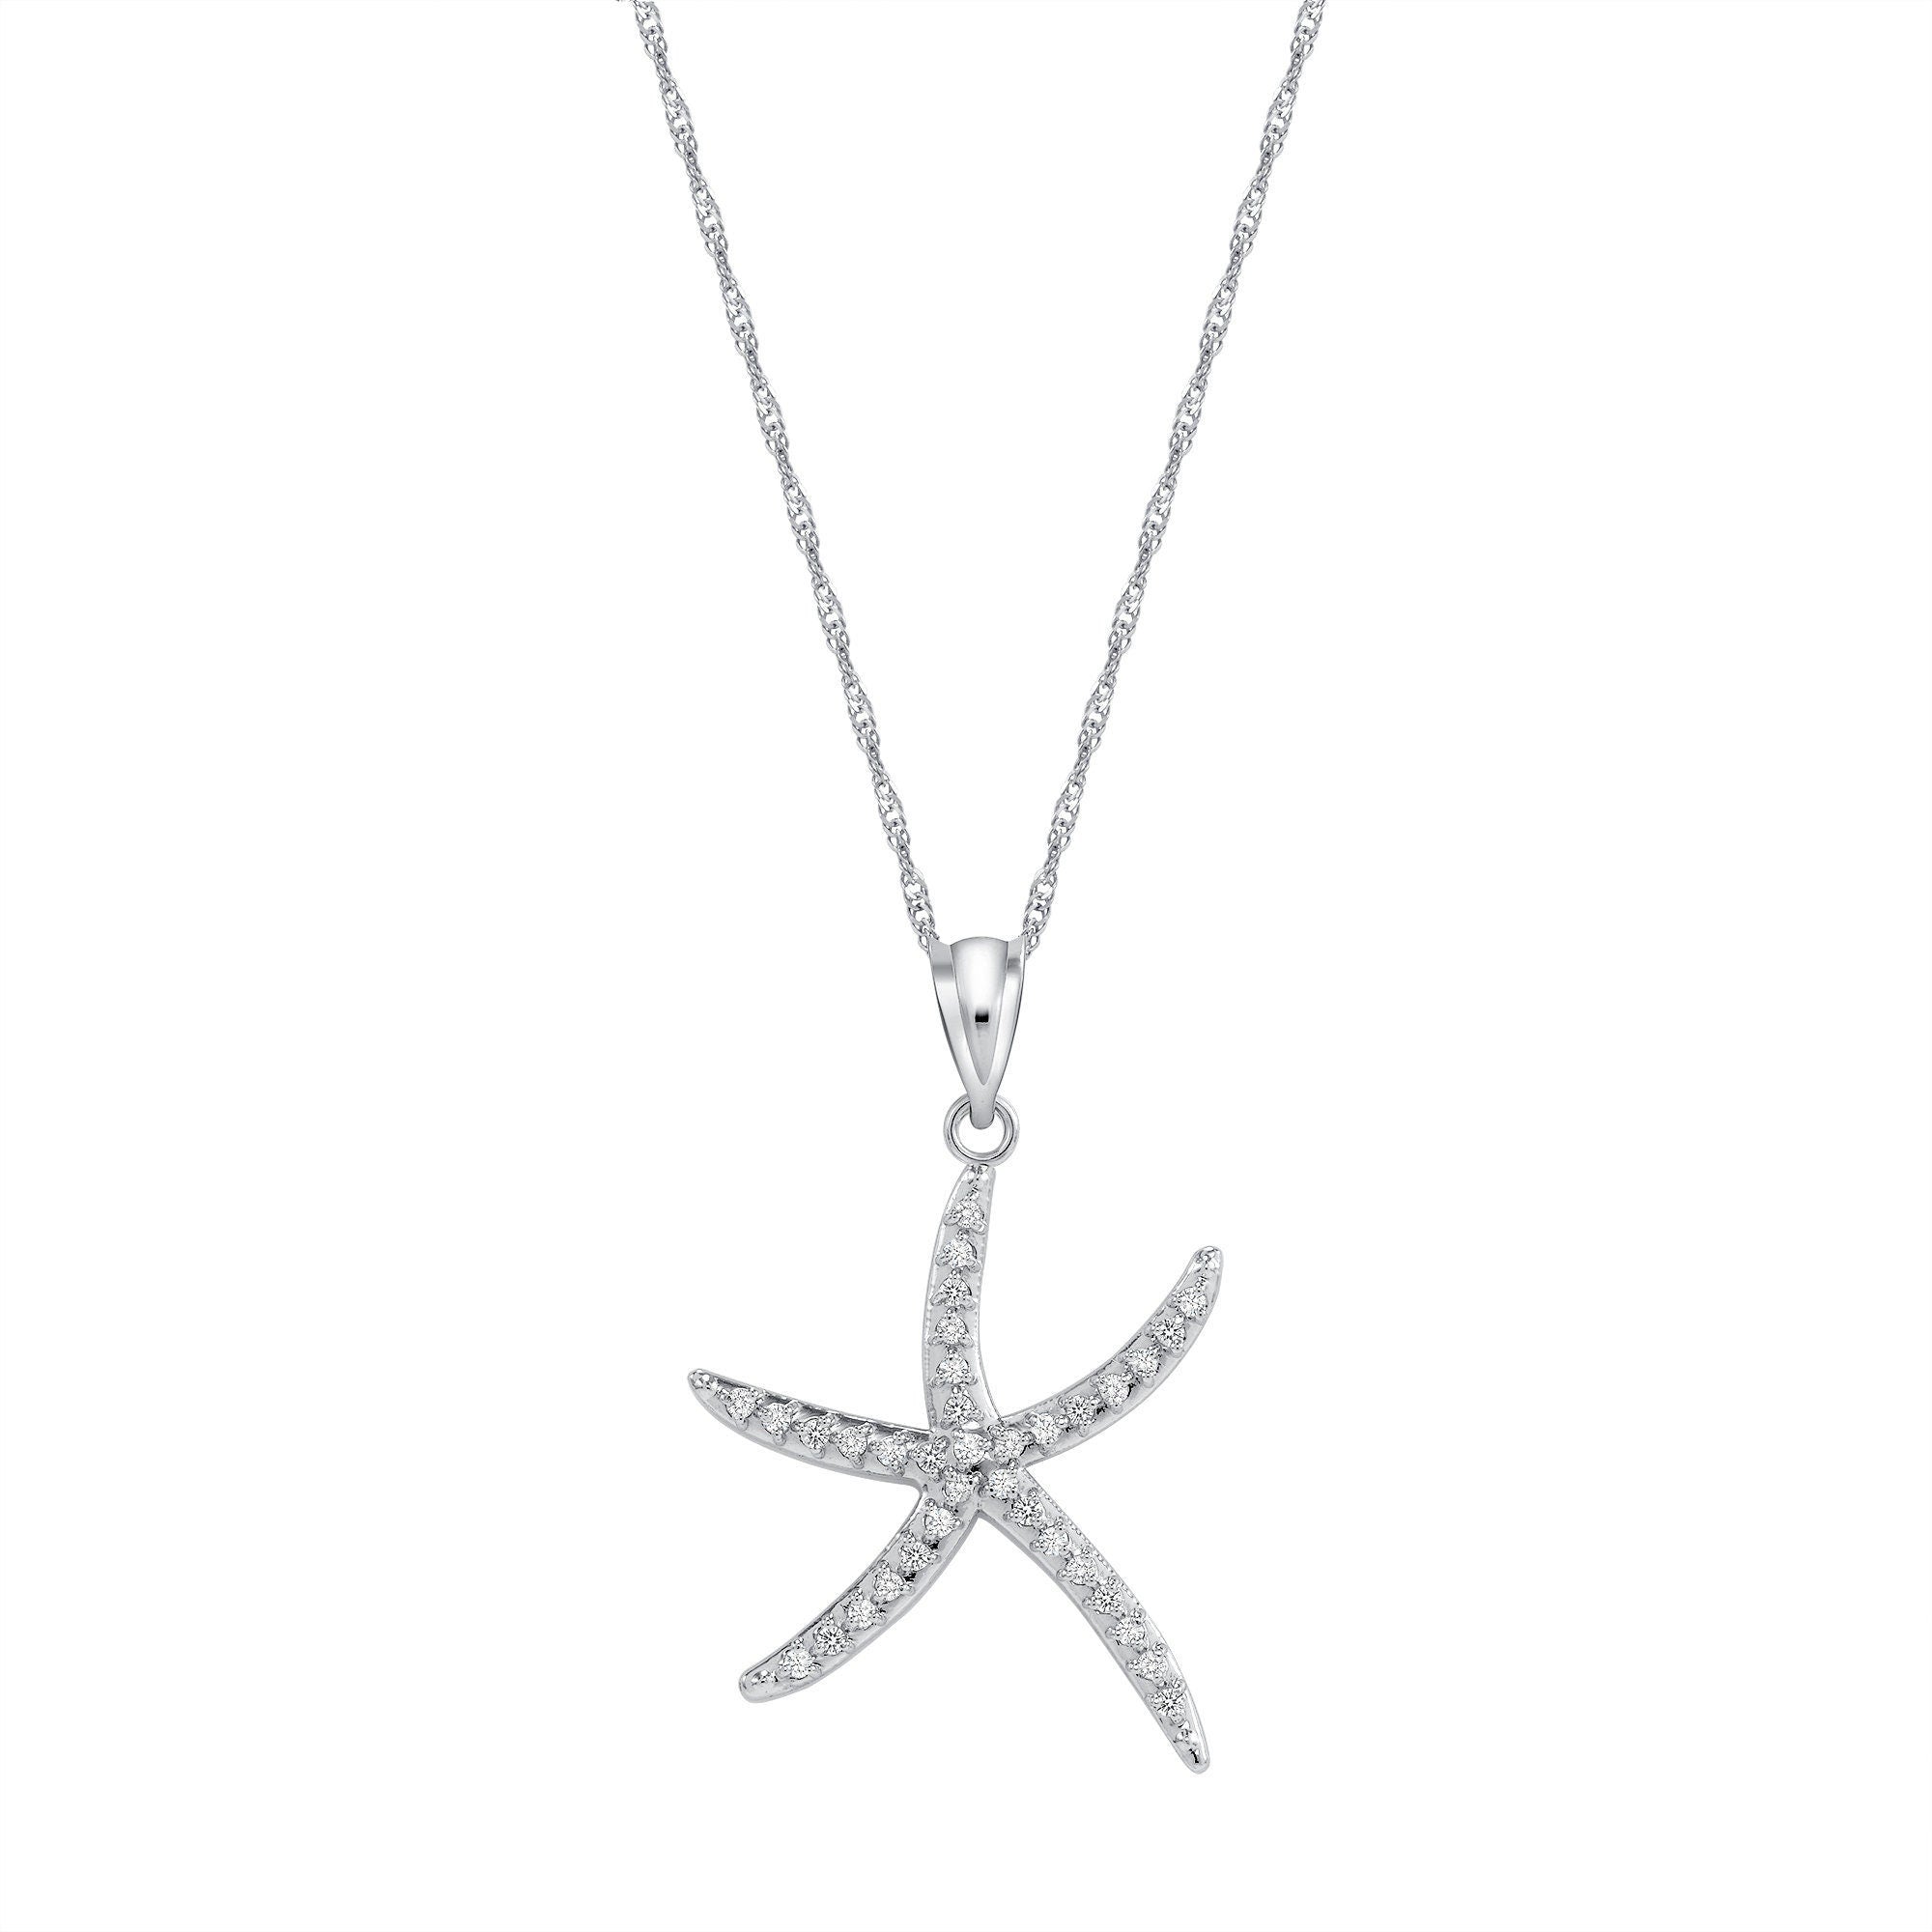 14k solid white gold diamond starfish pendant on 18" solid gold chain